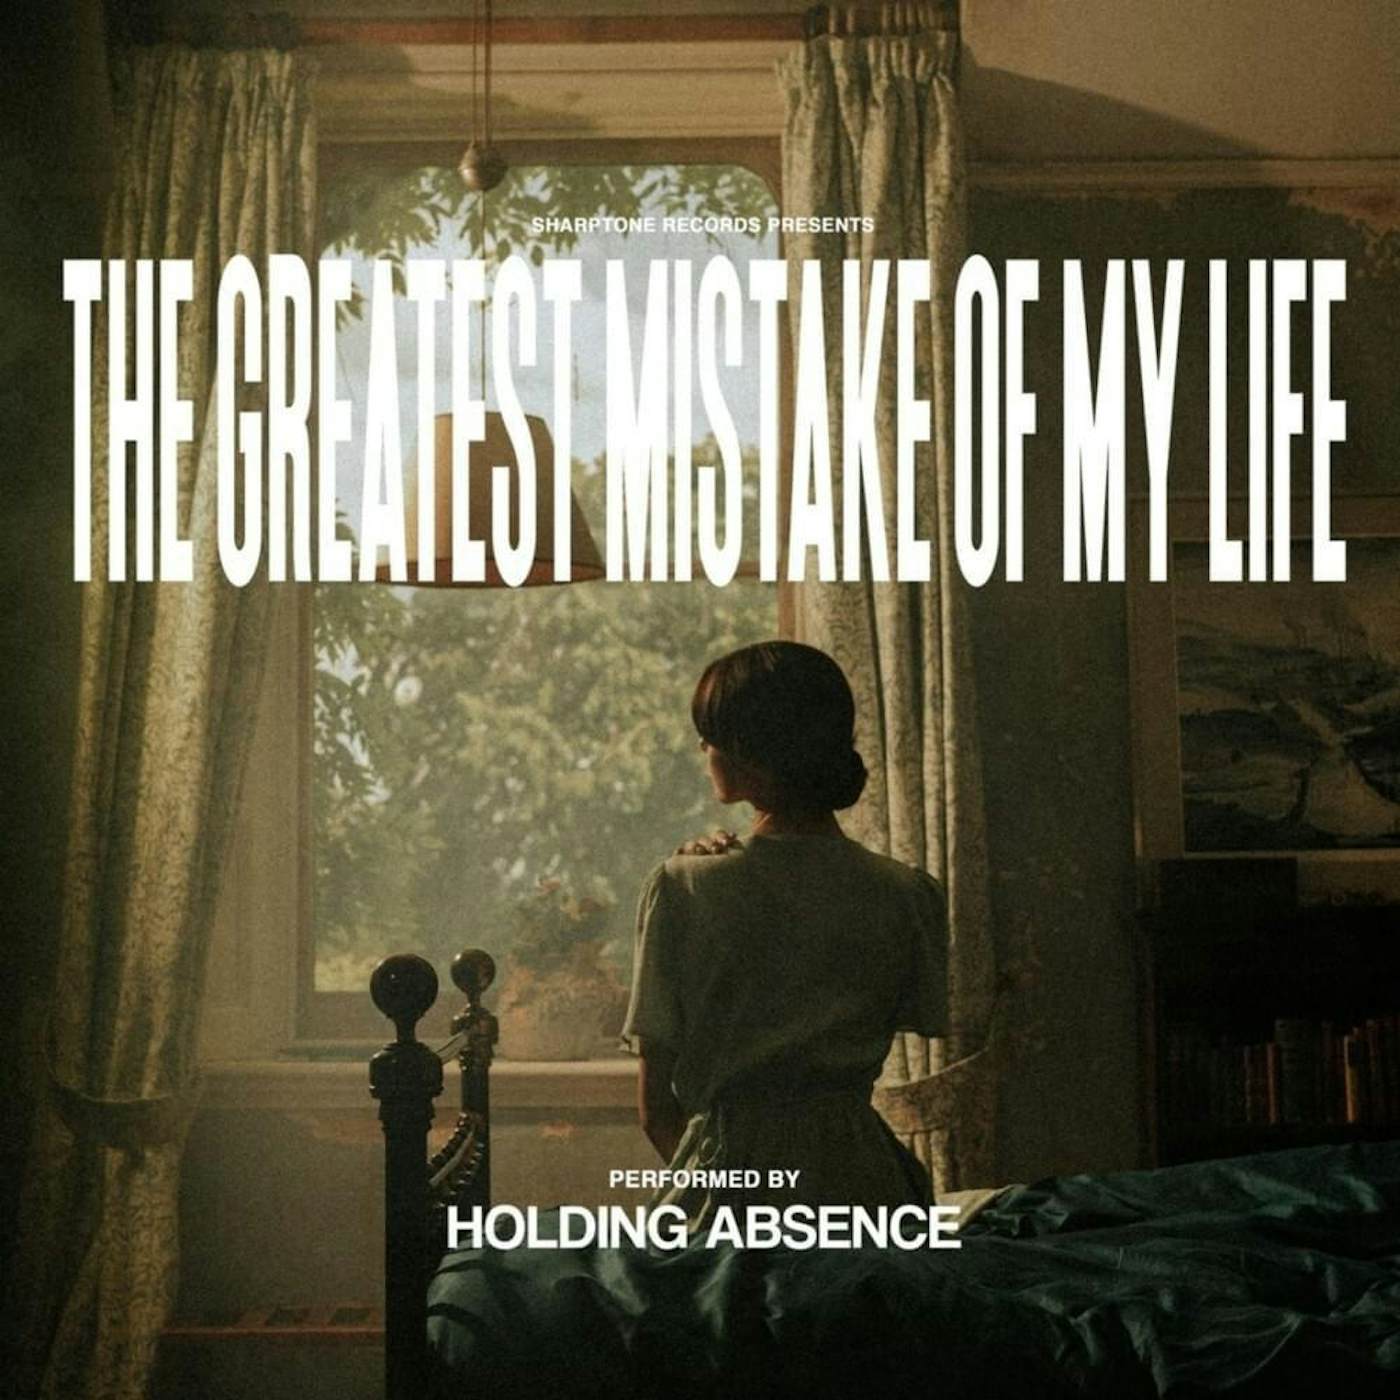 Holding Absence Greatest Mistake Of My Life - Sea Blue & Milky Vinyl Record